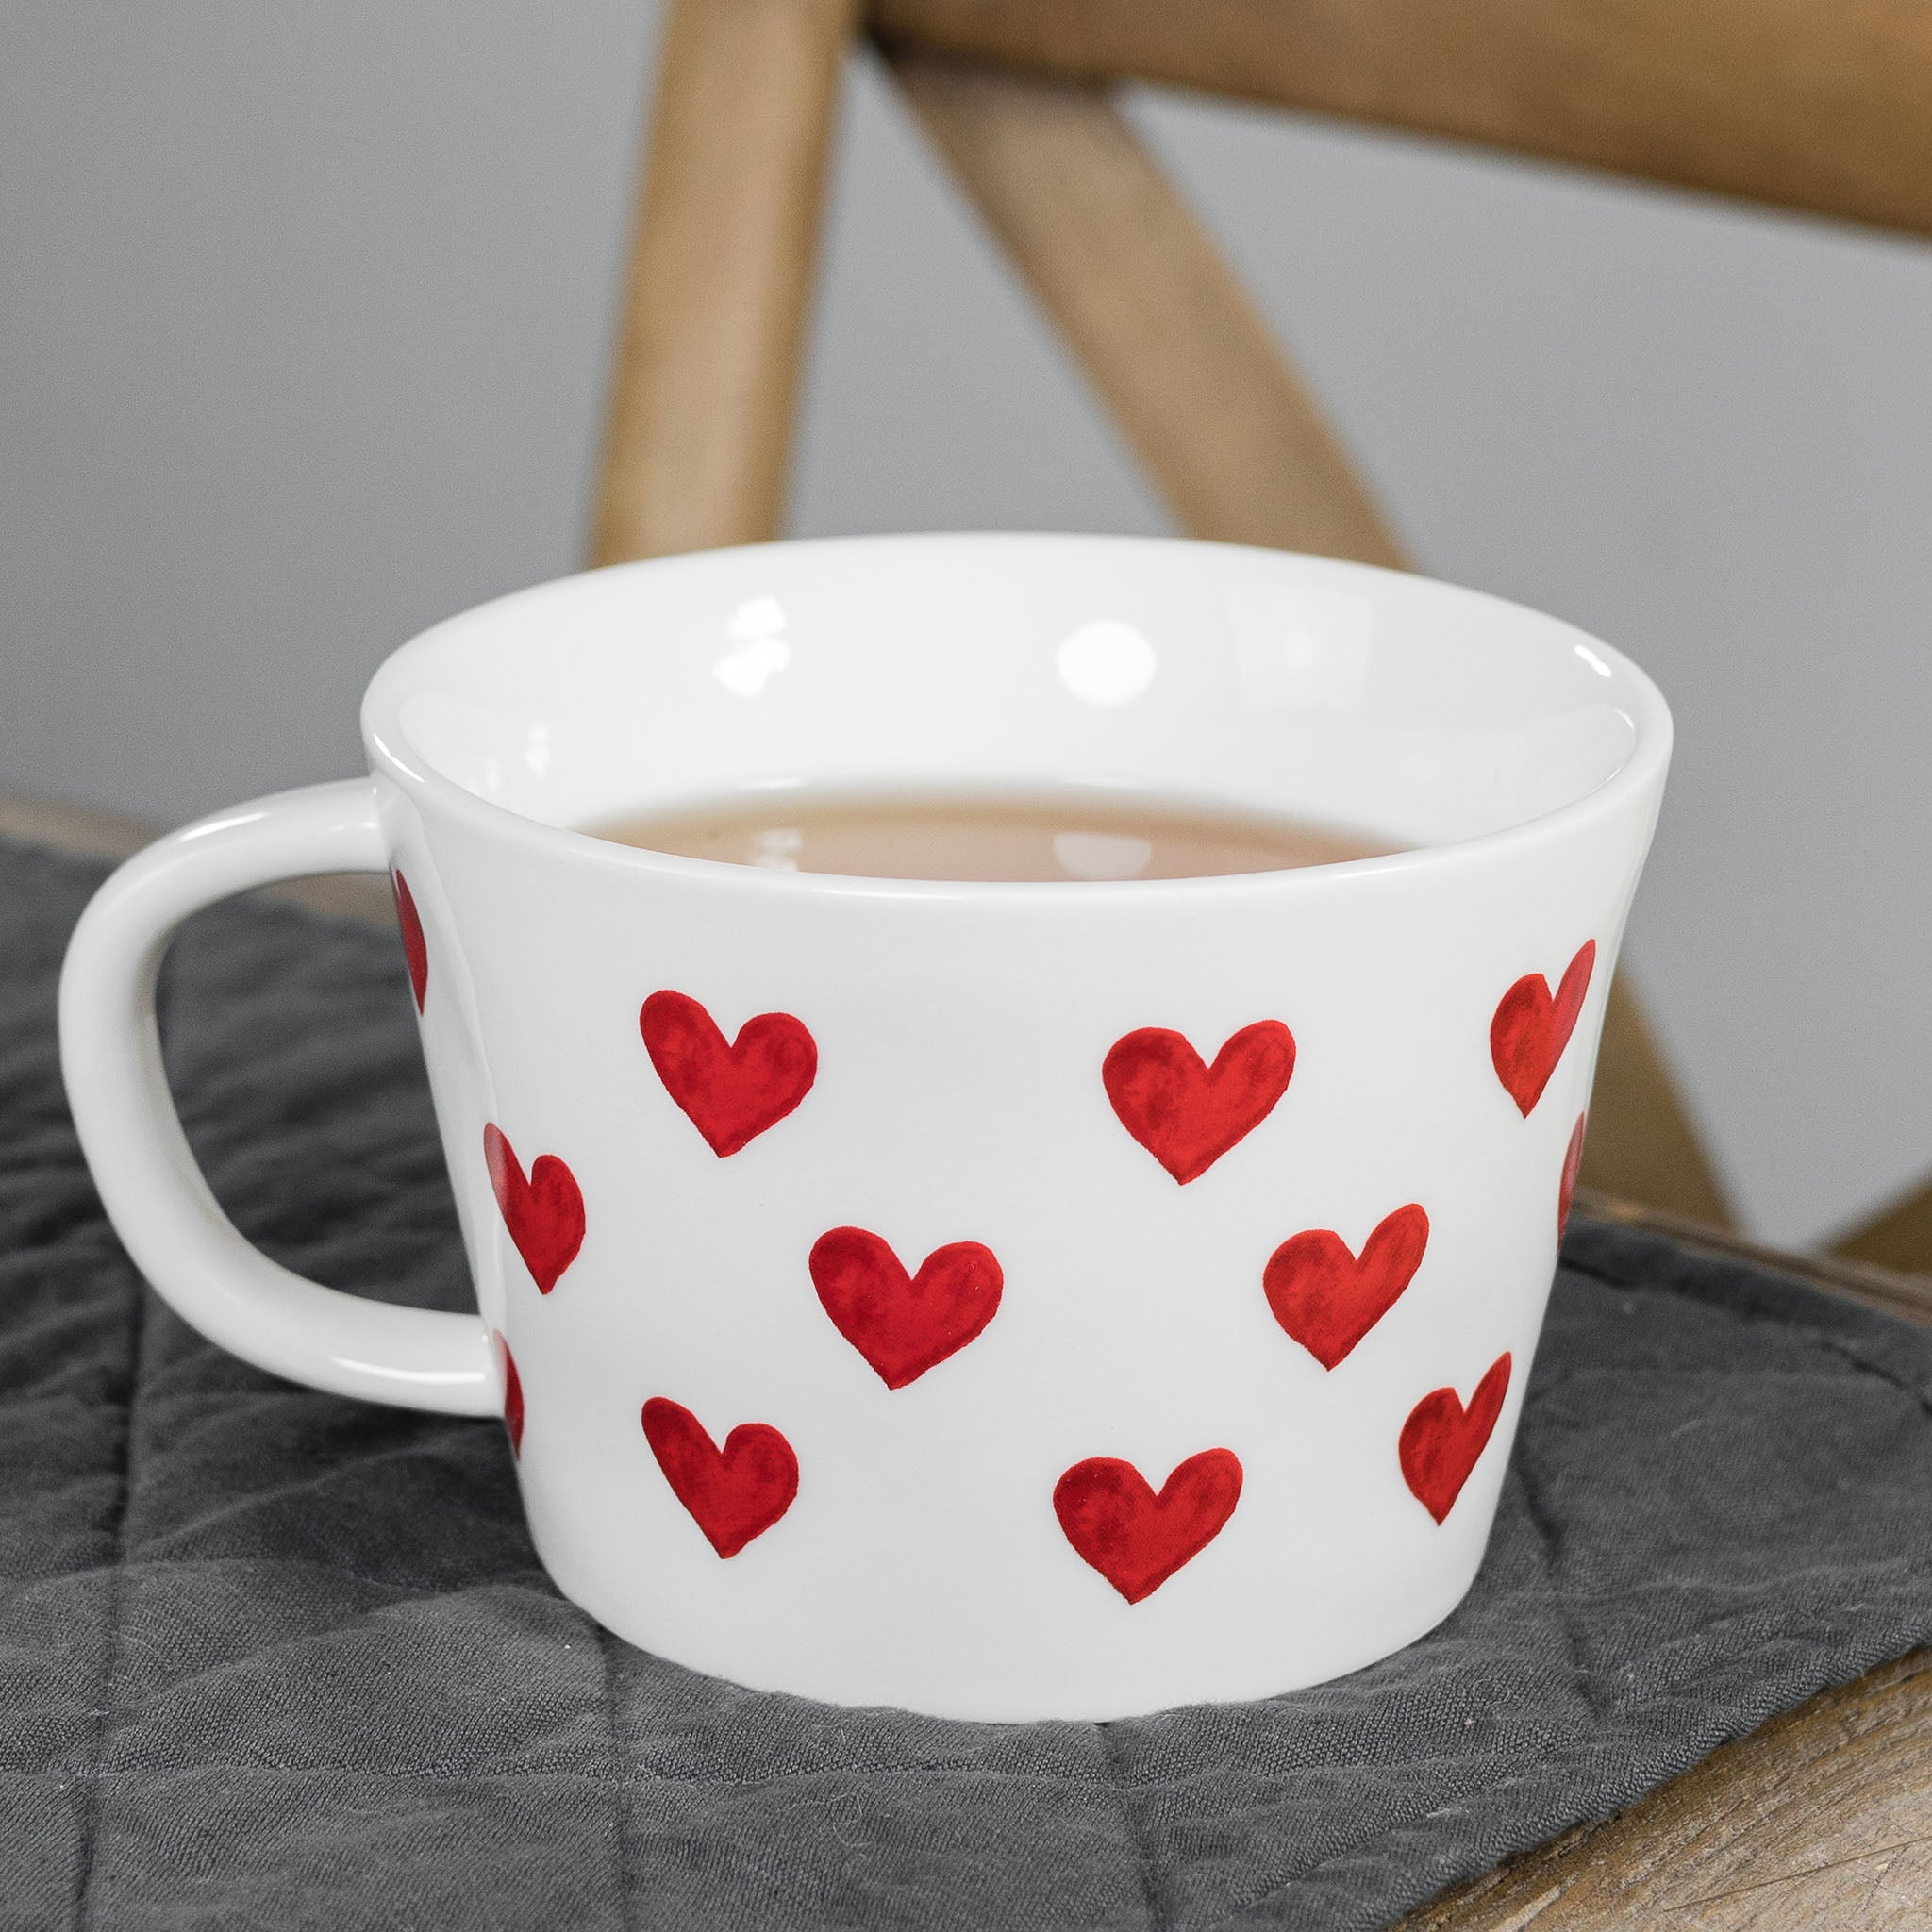 Set 2 cups breakfast upholstery red hearts